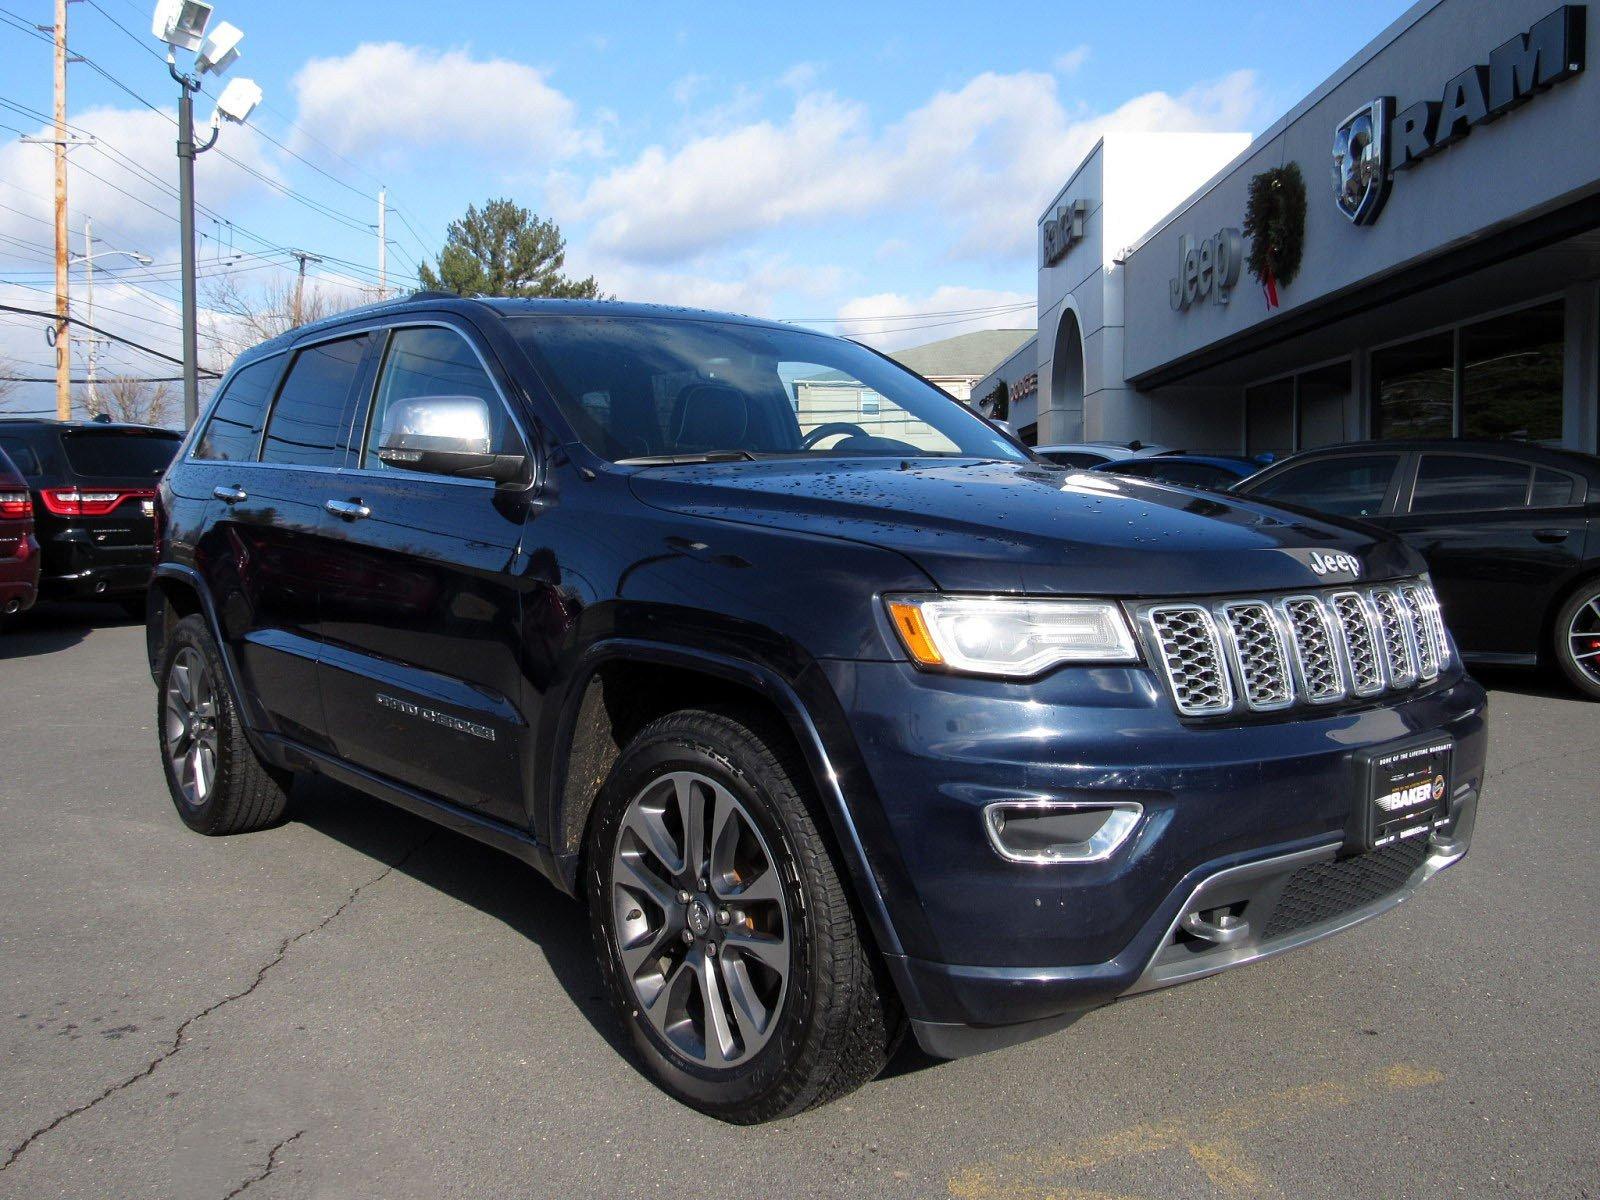 Used 17 Jeep Grand Cherokee Overland For Sale 30 995 Victory Lotus Stock